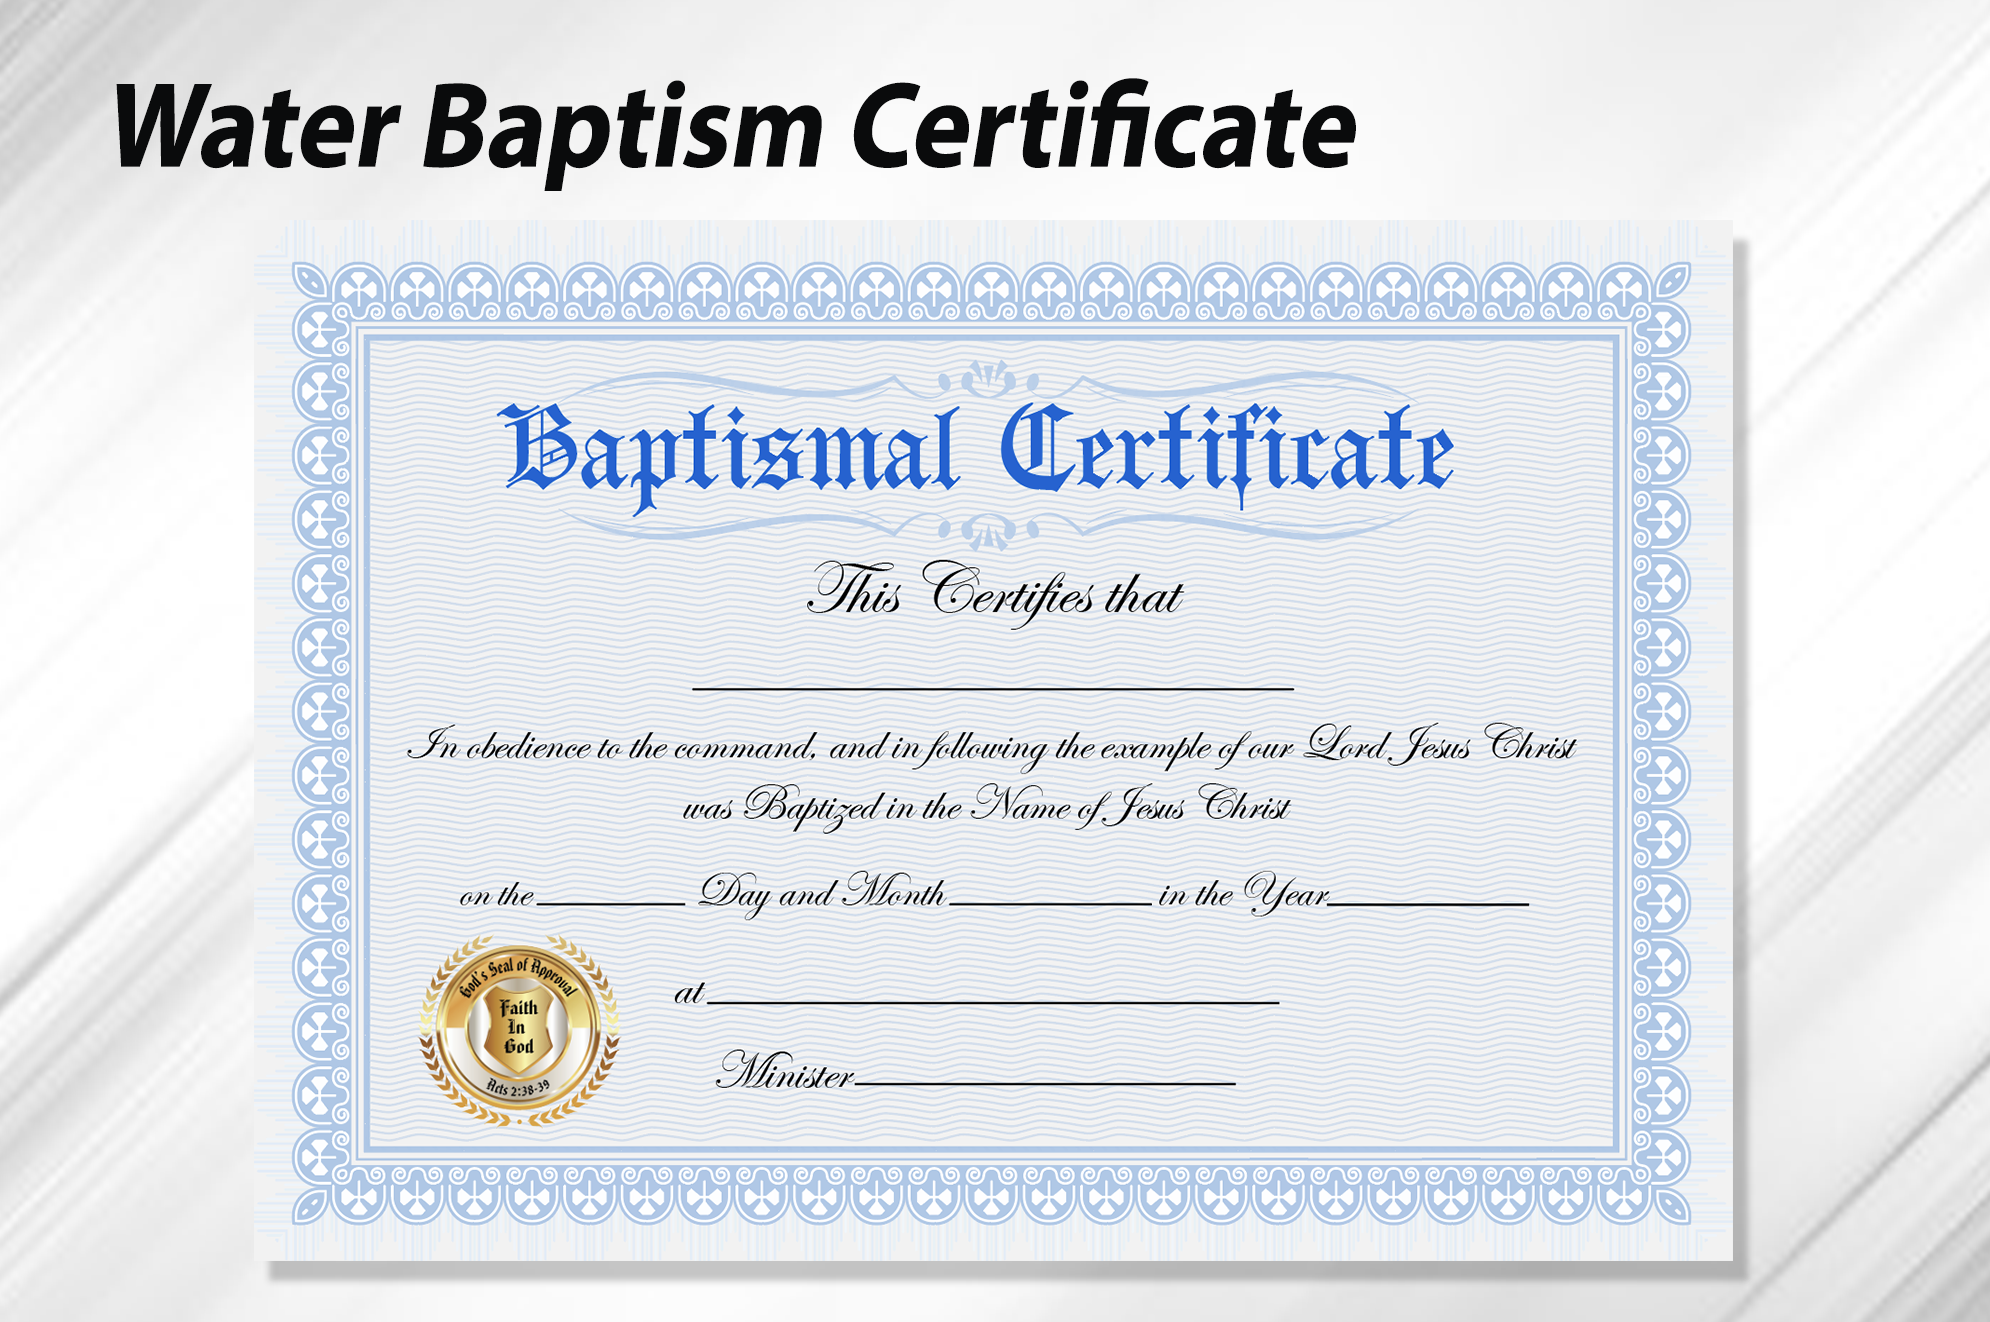 Water Baptism Certificate 4568 Apostolic New Life Publications